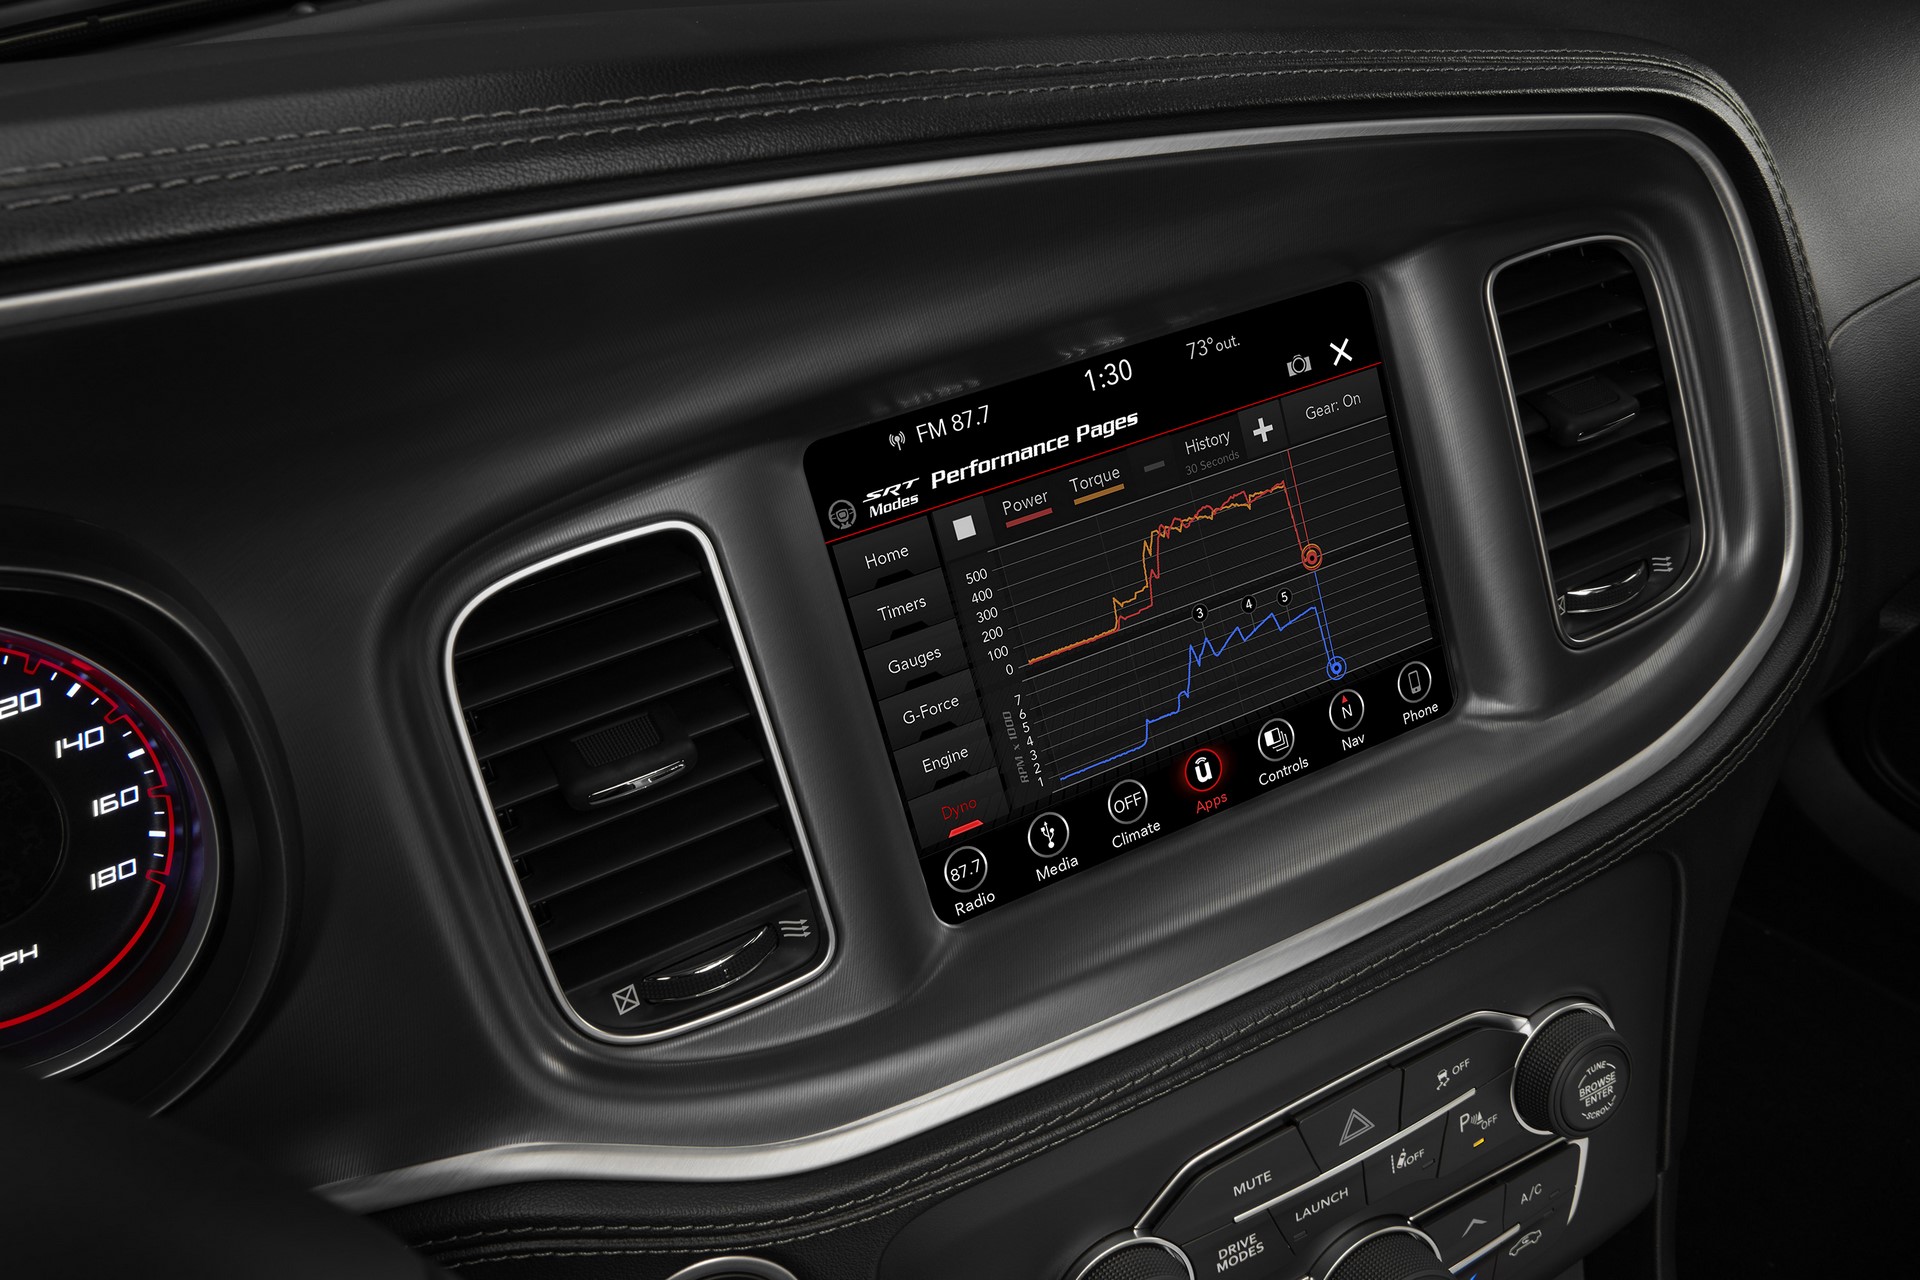 SRT Performance Pages bring critical vehicle performance data to the driver’s fingertips in the 2020 Dodge Charger Scat Pack Widebody